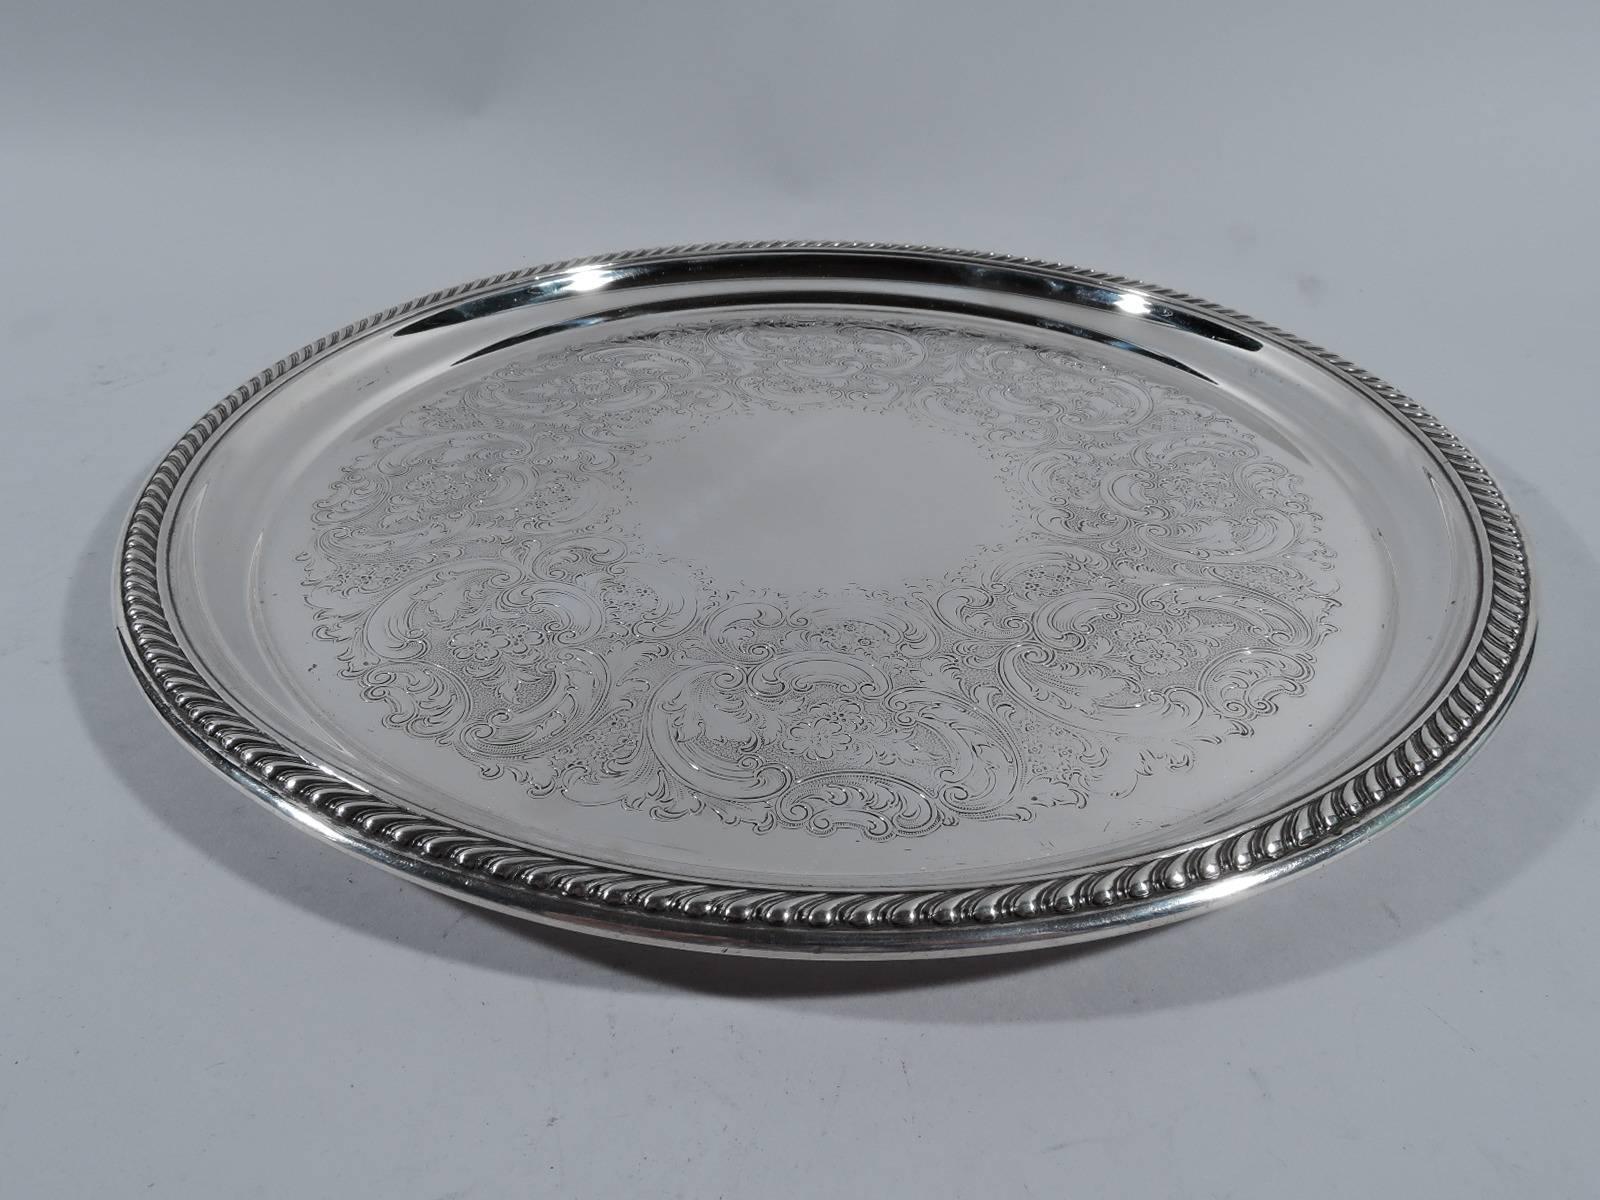 Traditional sterling silver serving tray. Made by Gorham in Providence. Circular with gadrooned rim. Vacant well center surrounded by dense scrollwork and flowers on stippled ground. Hallmark includes no. 42636. Heavy weight: 26.5 troy ounces.